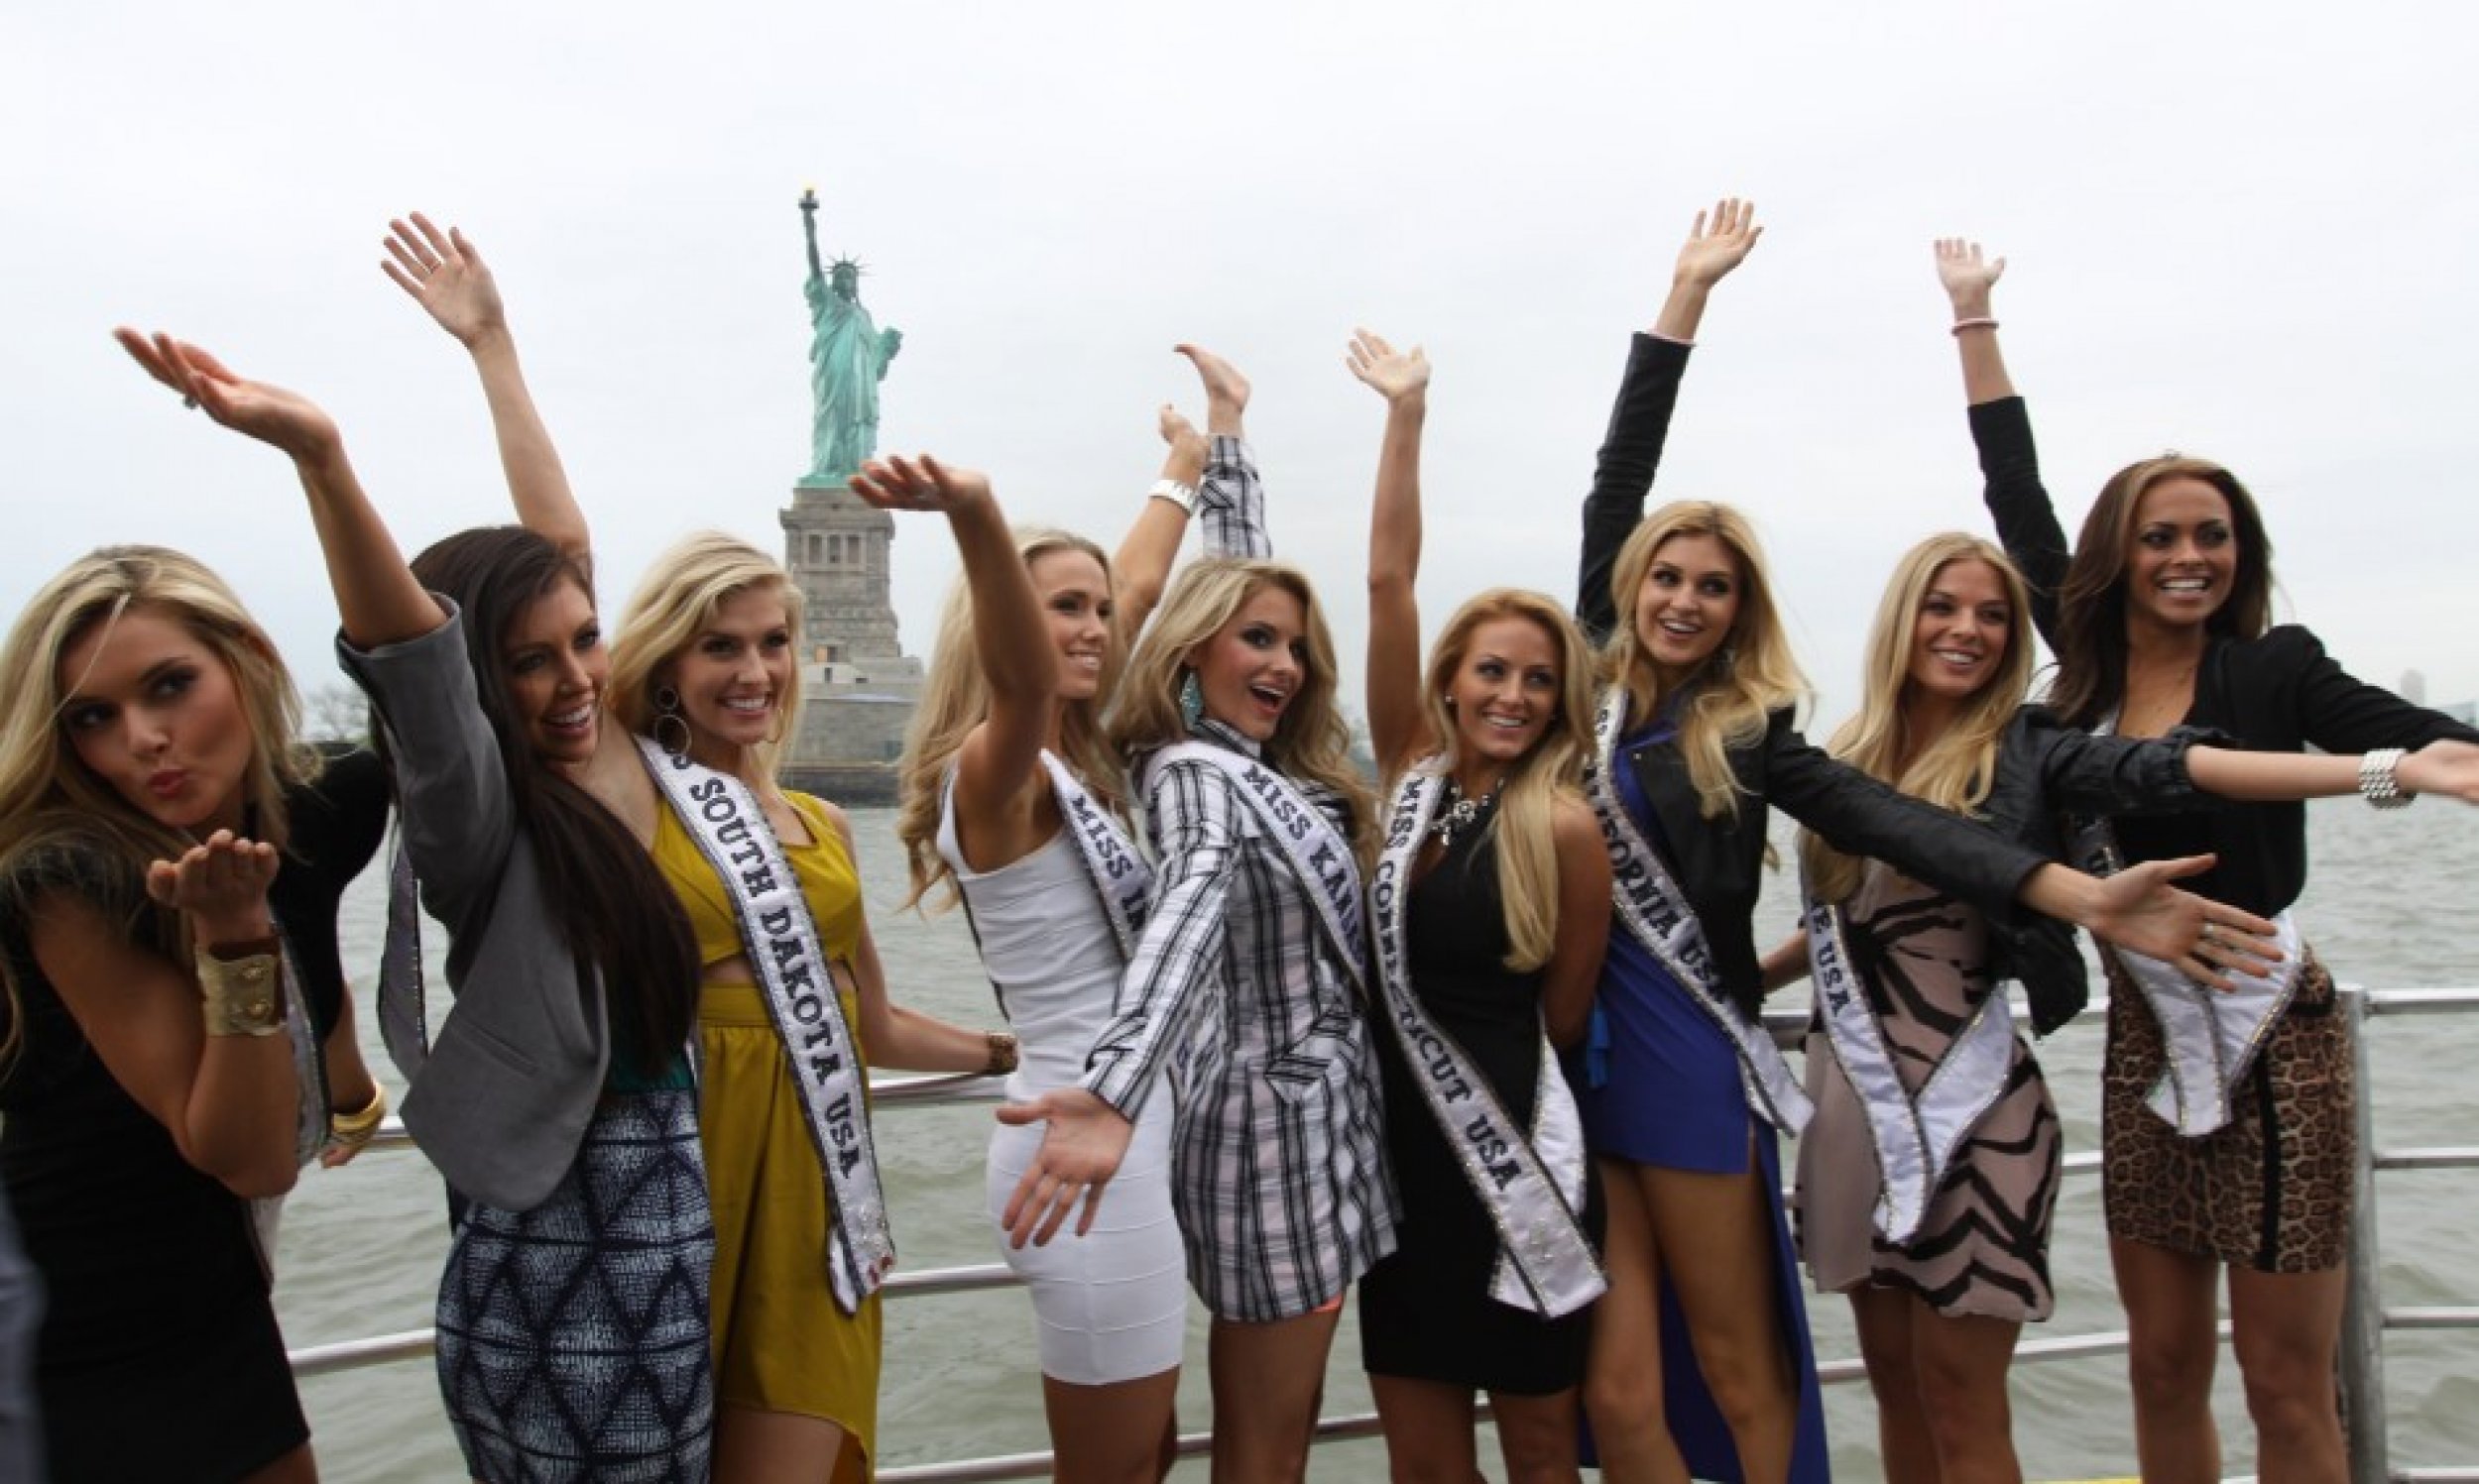 Several Miss USA contestants pose for an iconic photo in front of the Statue of Liberty